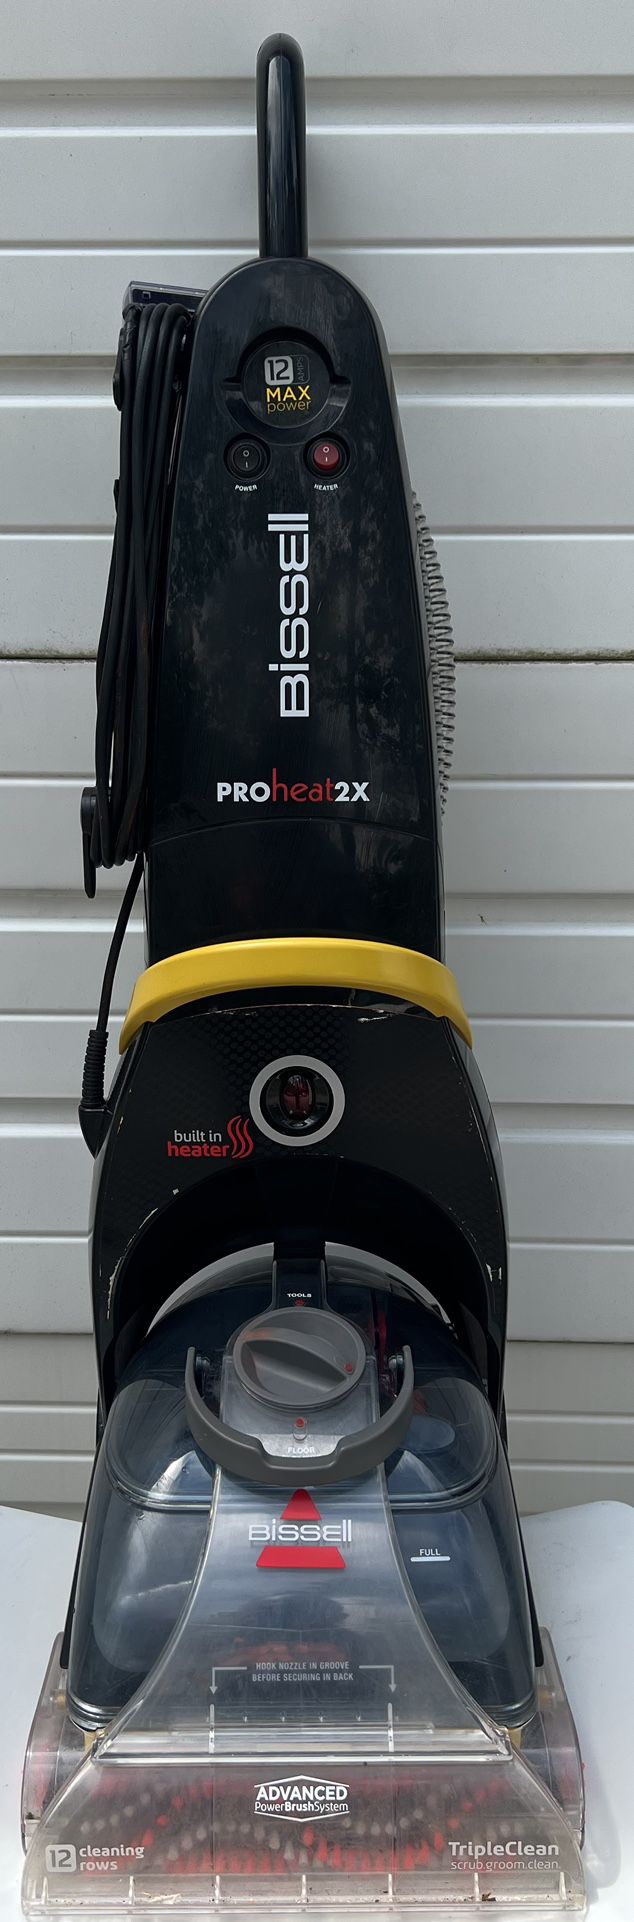 BISSELL ProHeat 2X Advanced Full-Size Carpet Cleaner, 1383